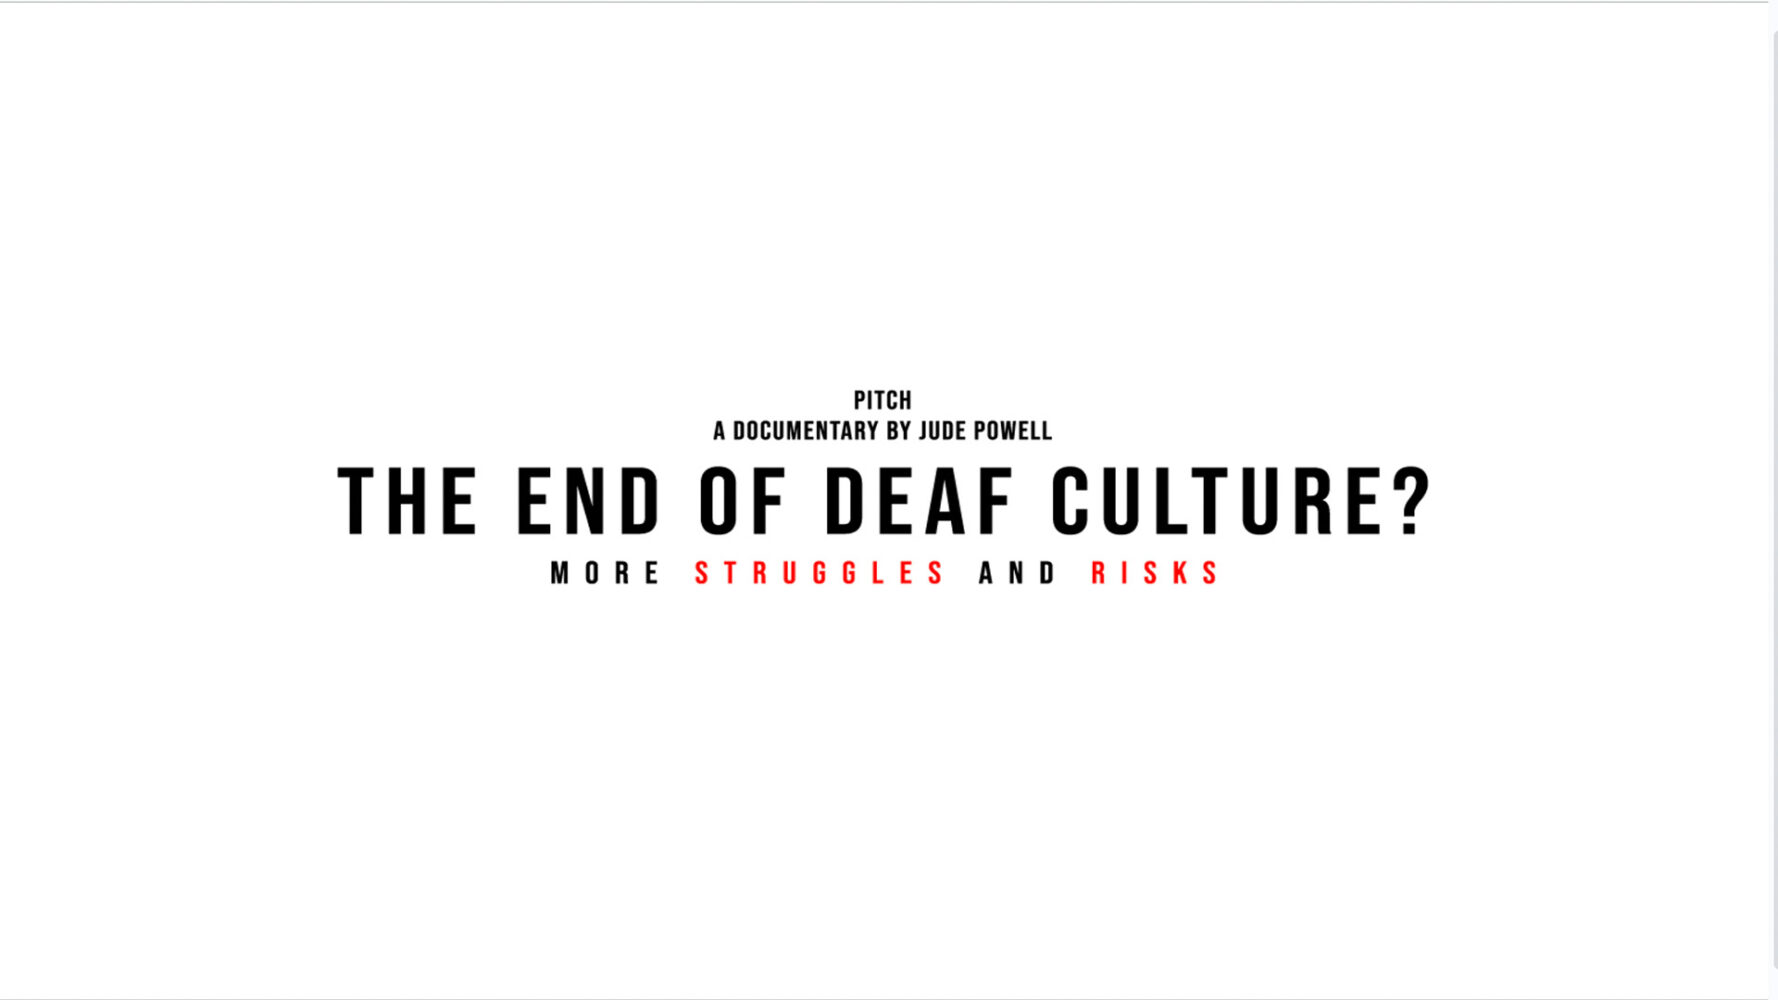 The End of Deaf Culture